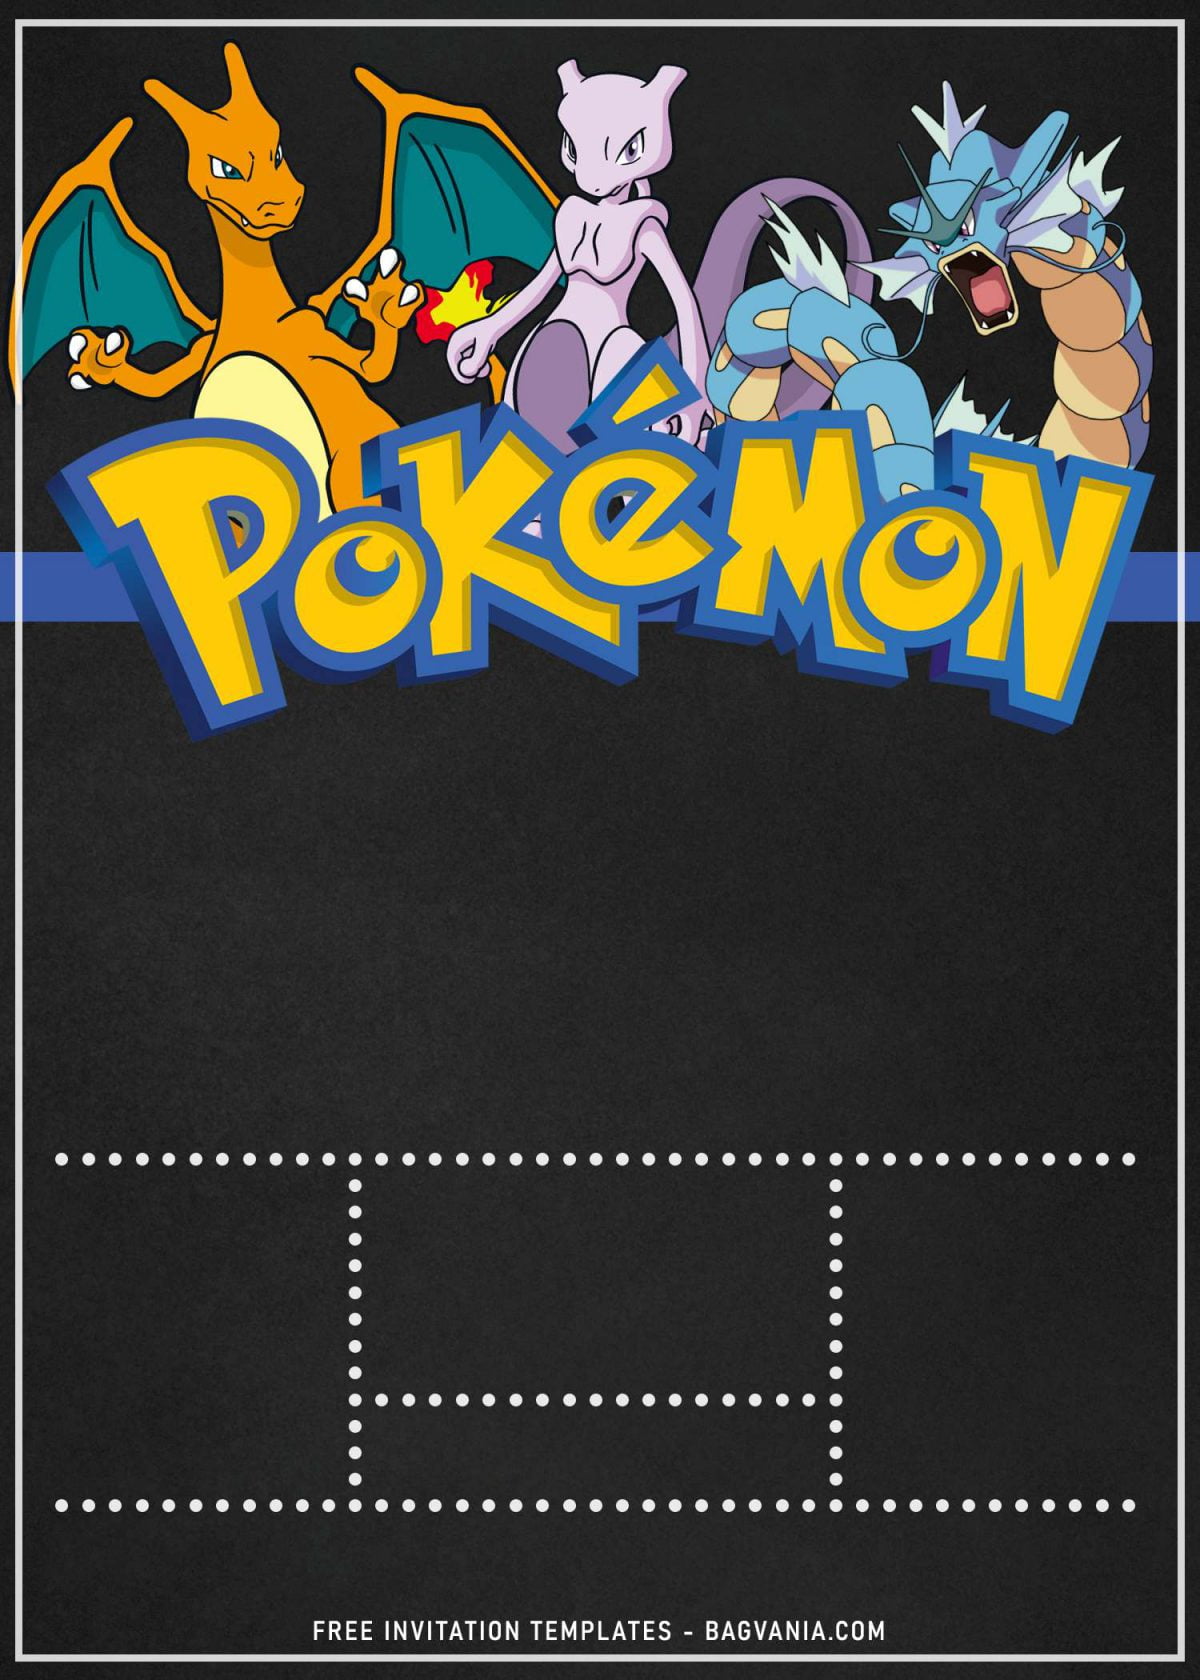 11+ Awesome Pokemon Chalkboard Invitation Templates For Boys Birthday Party and has Gyarados and Dragonite